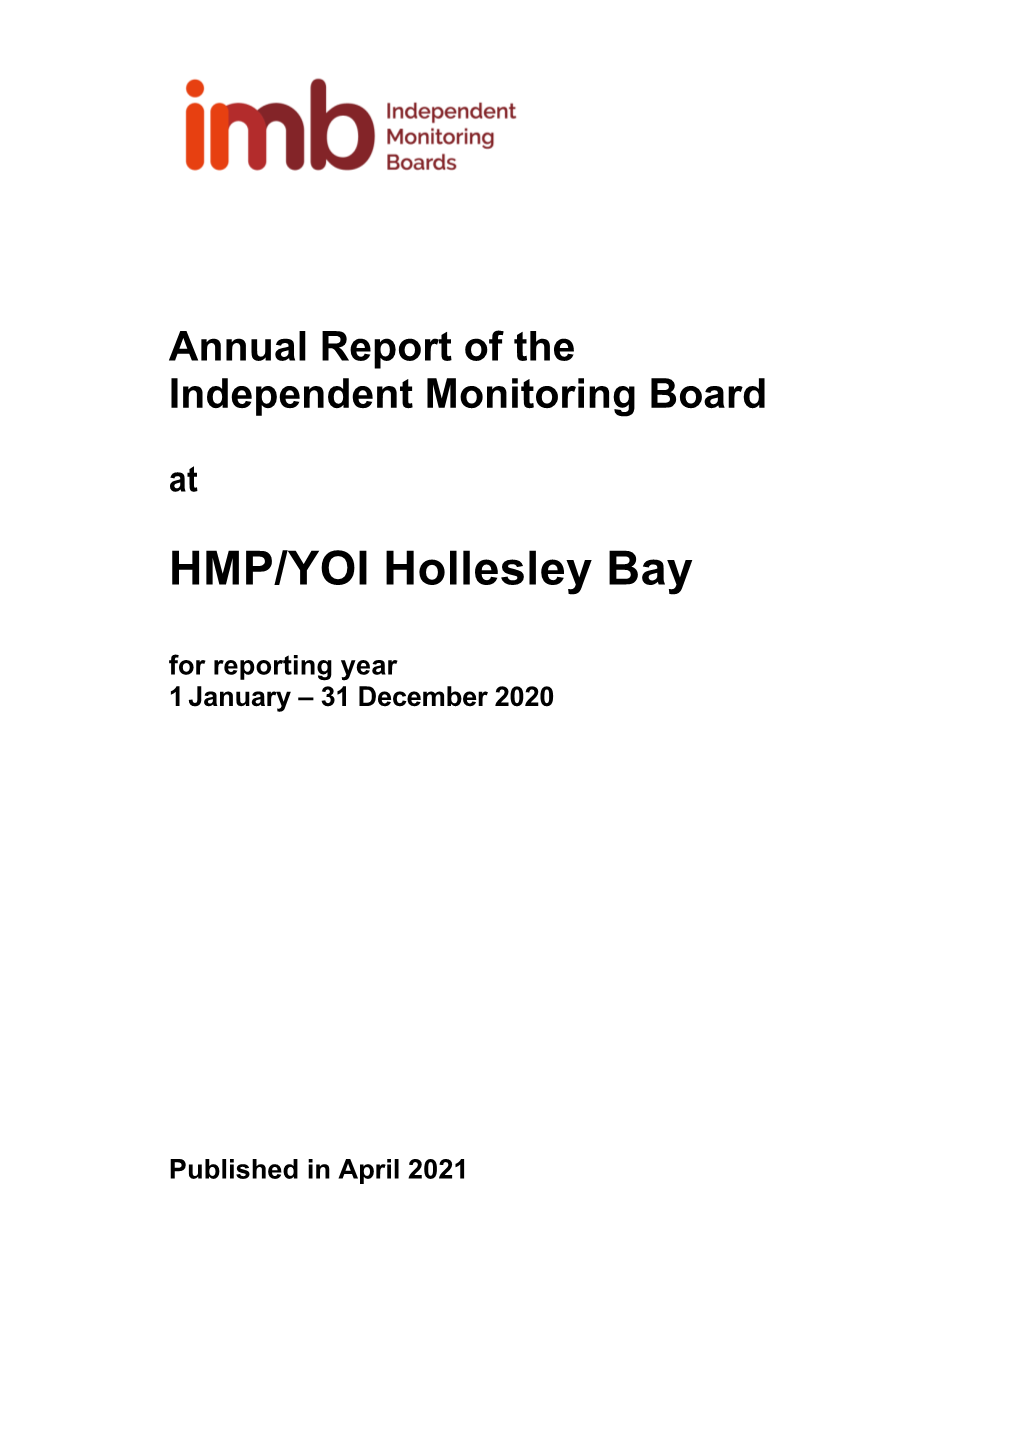 HMP/YOI Hollesley Bay for Reporting Year 1 January – 31 December 2020